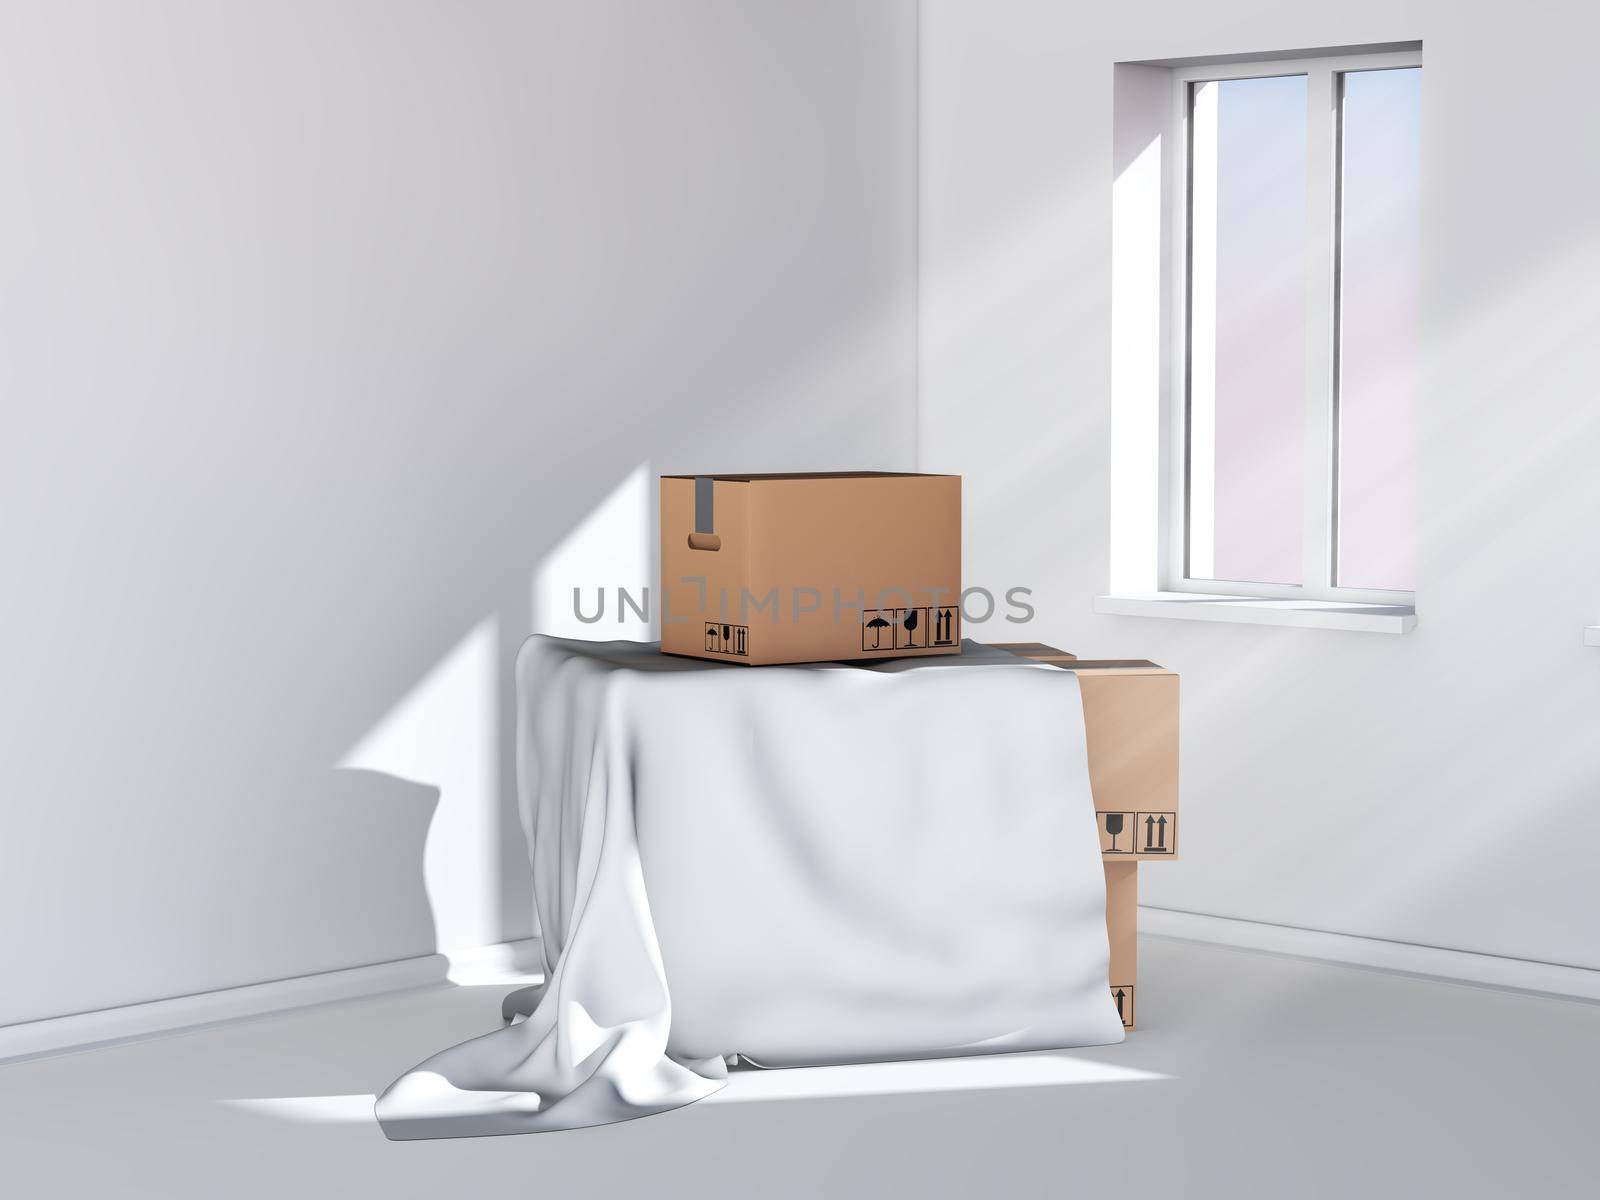 cardboard boxes, covered with a cloth in a room with a window